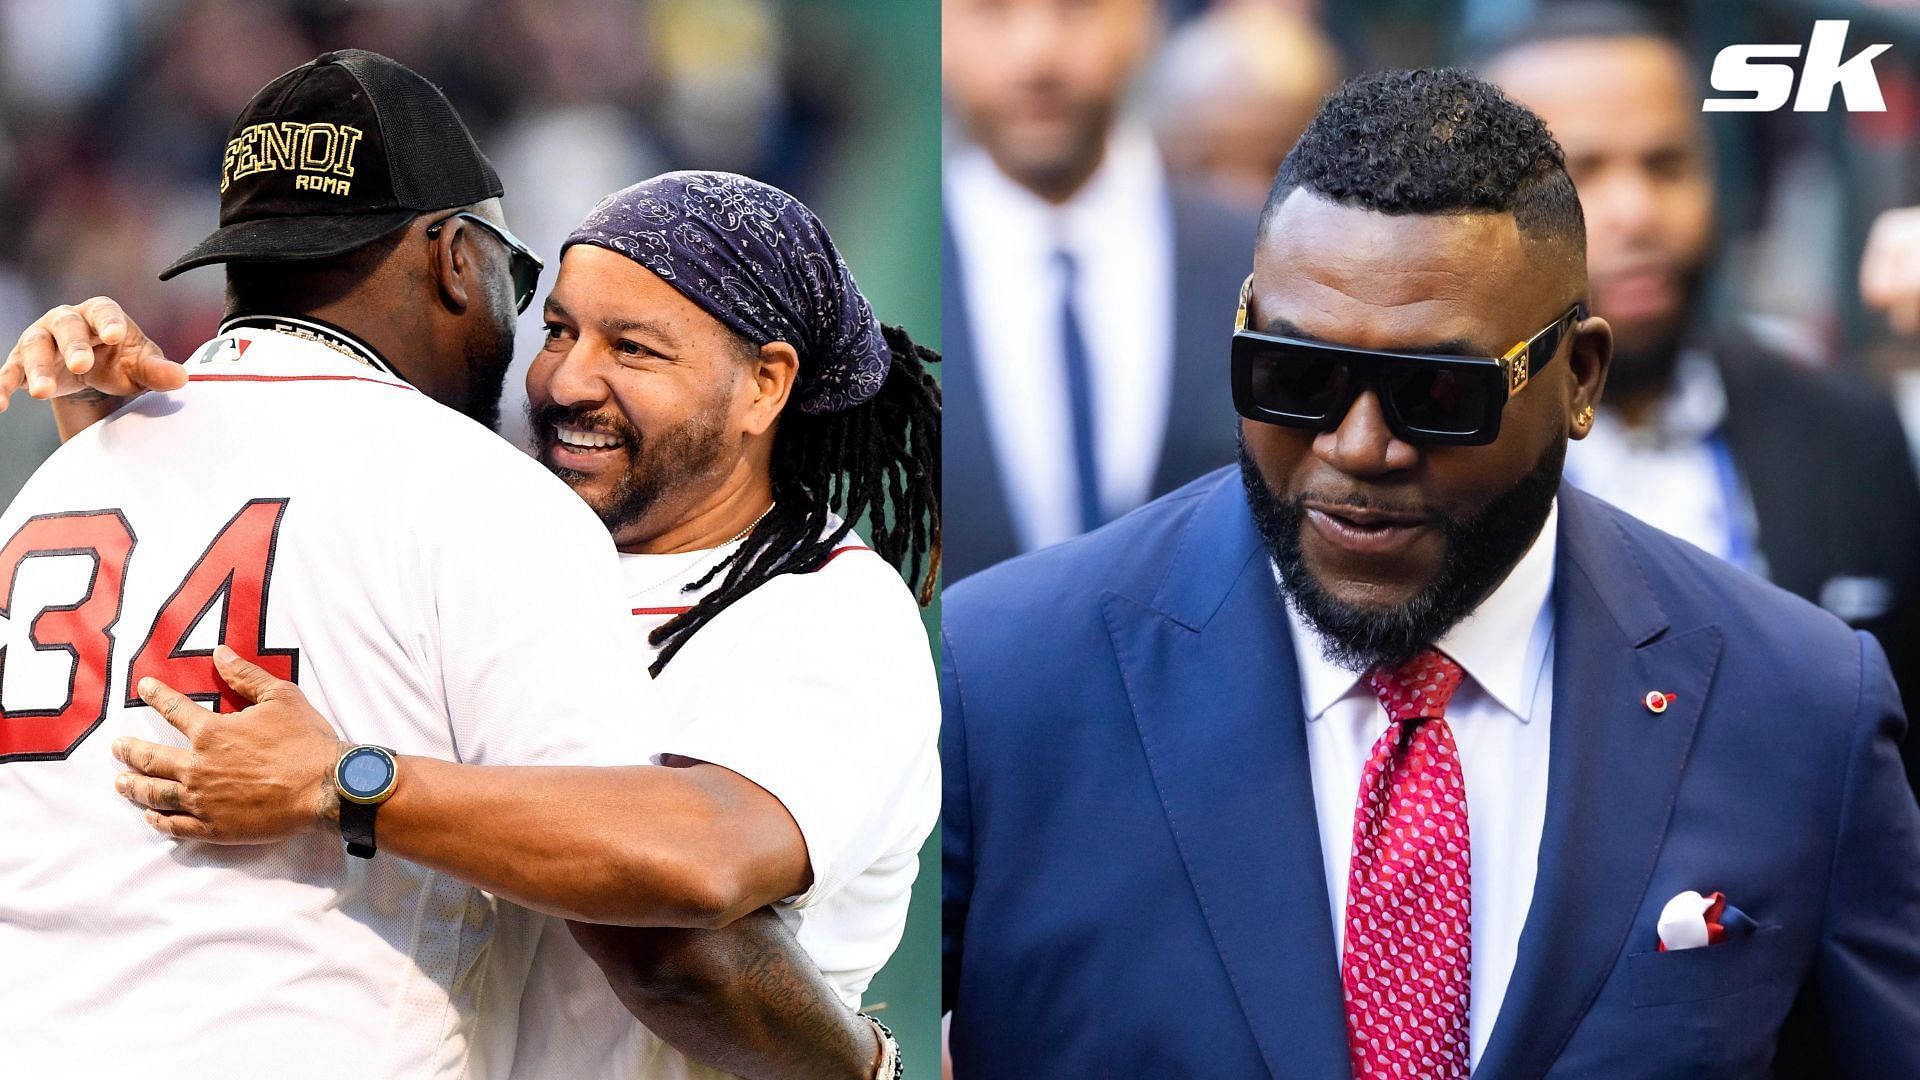 David Ortiz was shared his disappointment over Red Sox teammate Manny Ramirez not being in the Hall of Fame